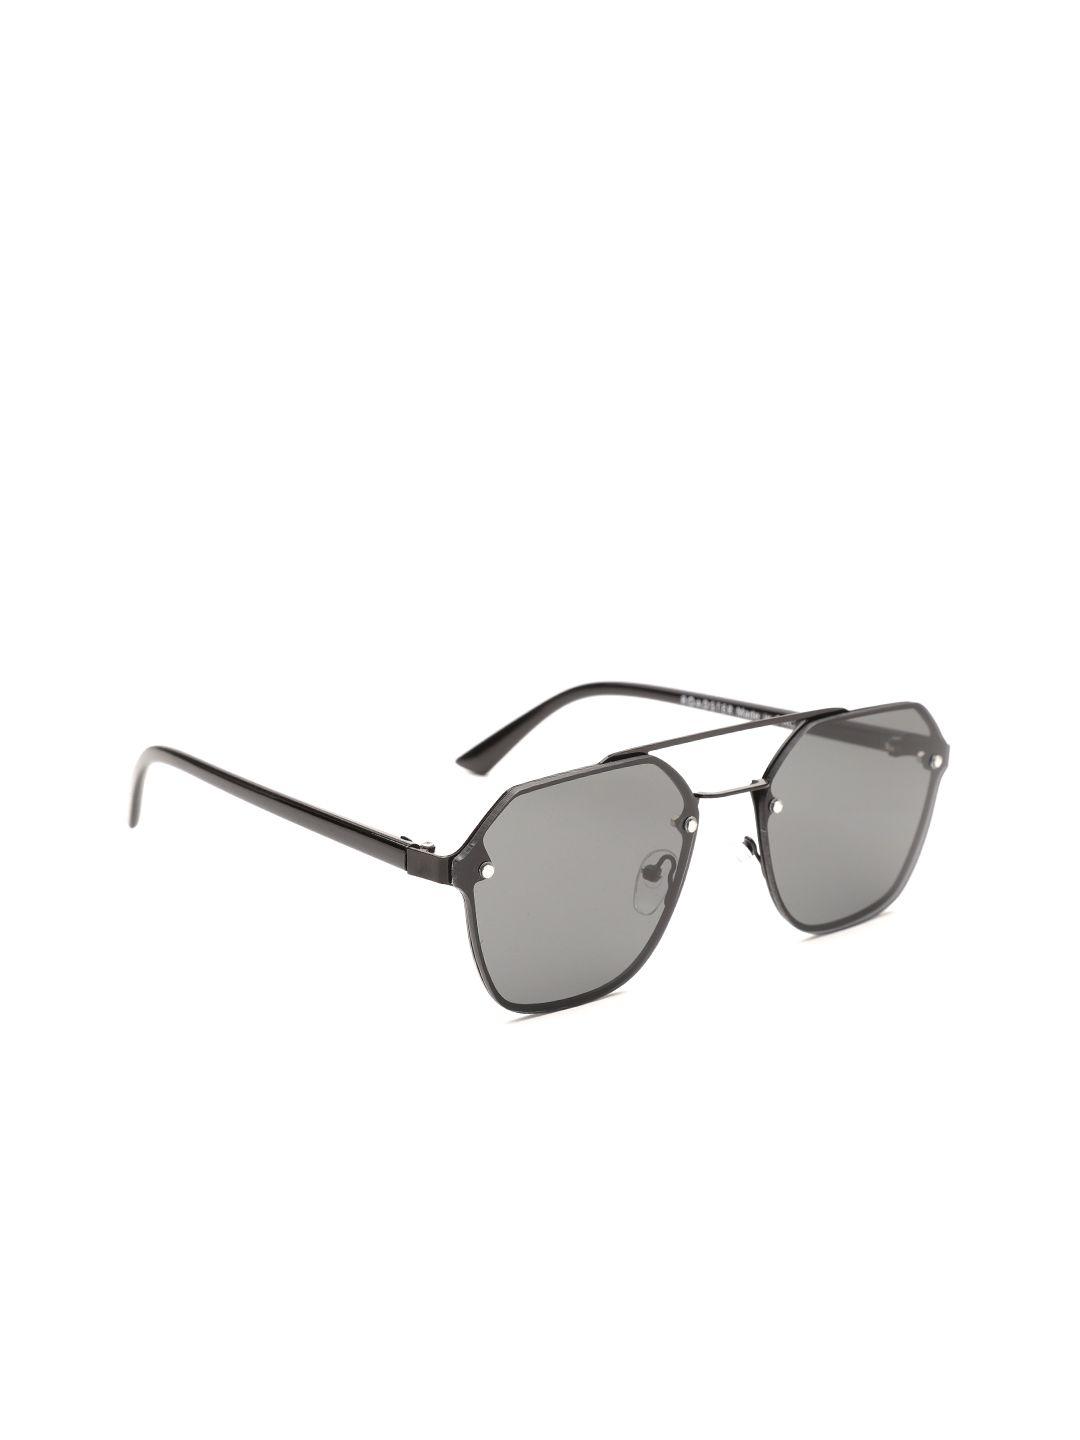 the roadster lifestyle co unisex square sunglasses mfb-pn-ps-t9578